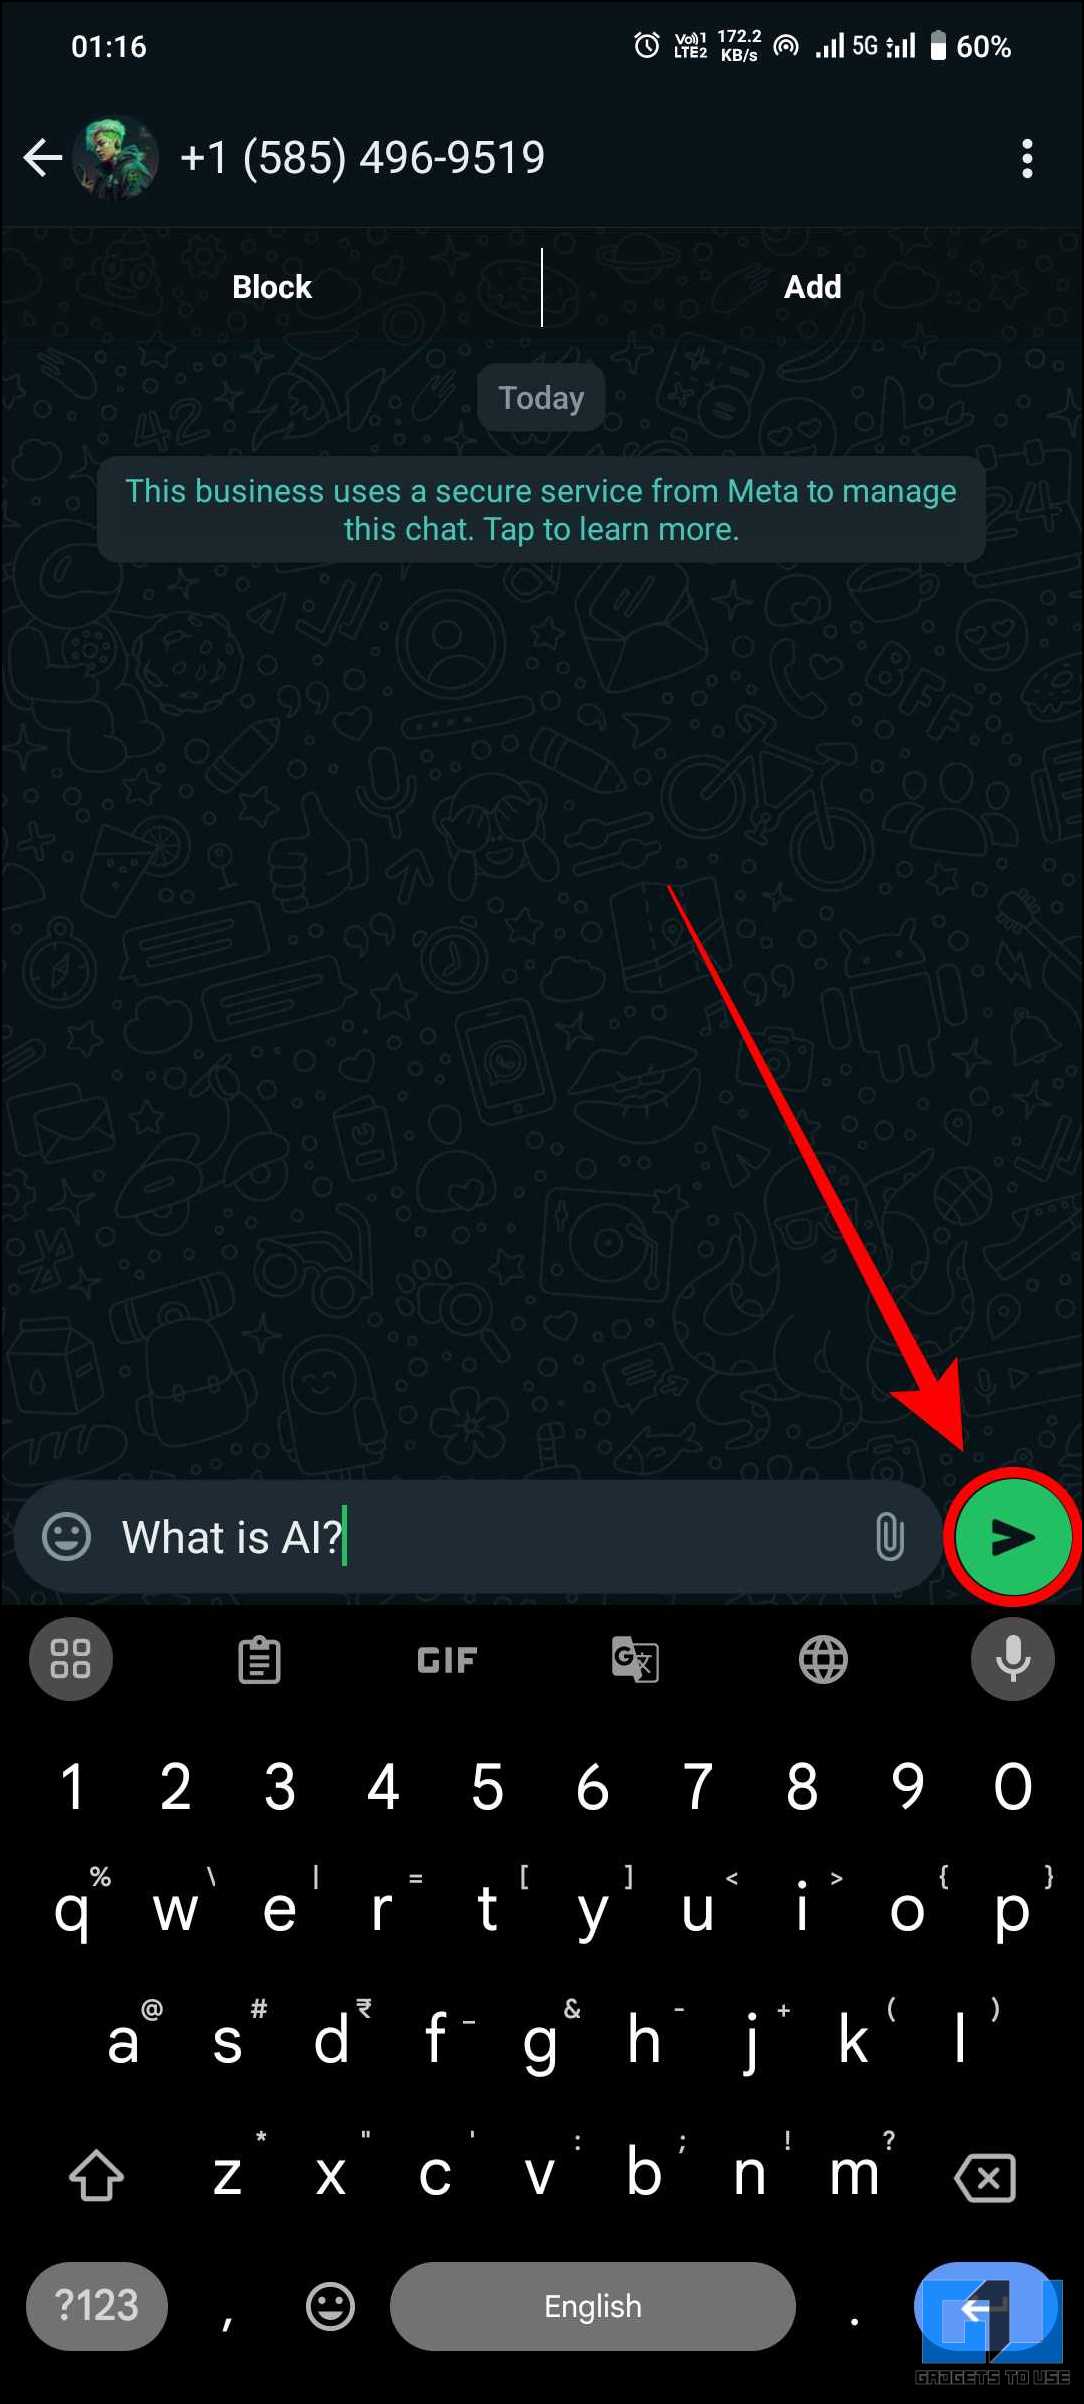 Send button highlighted in red.